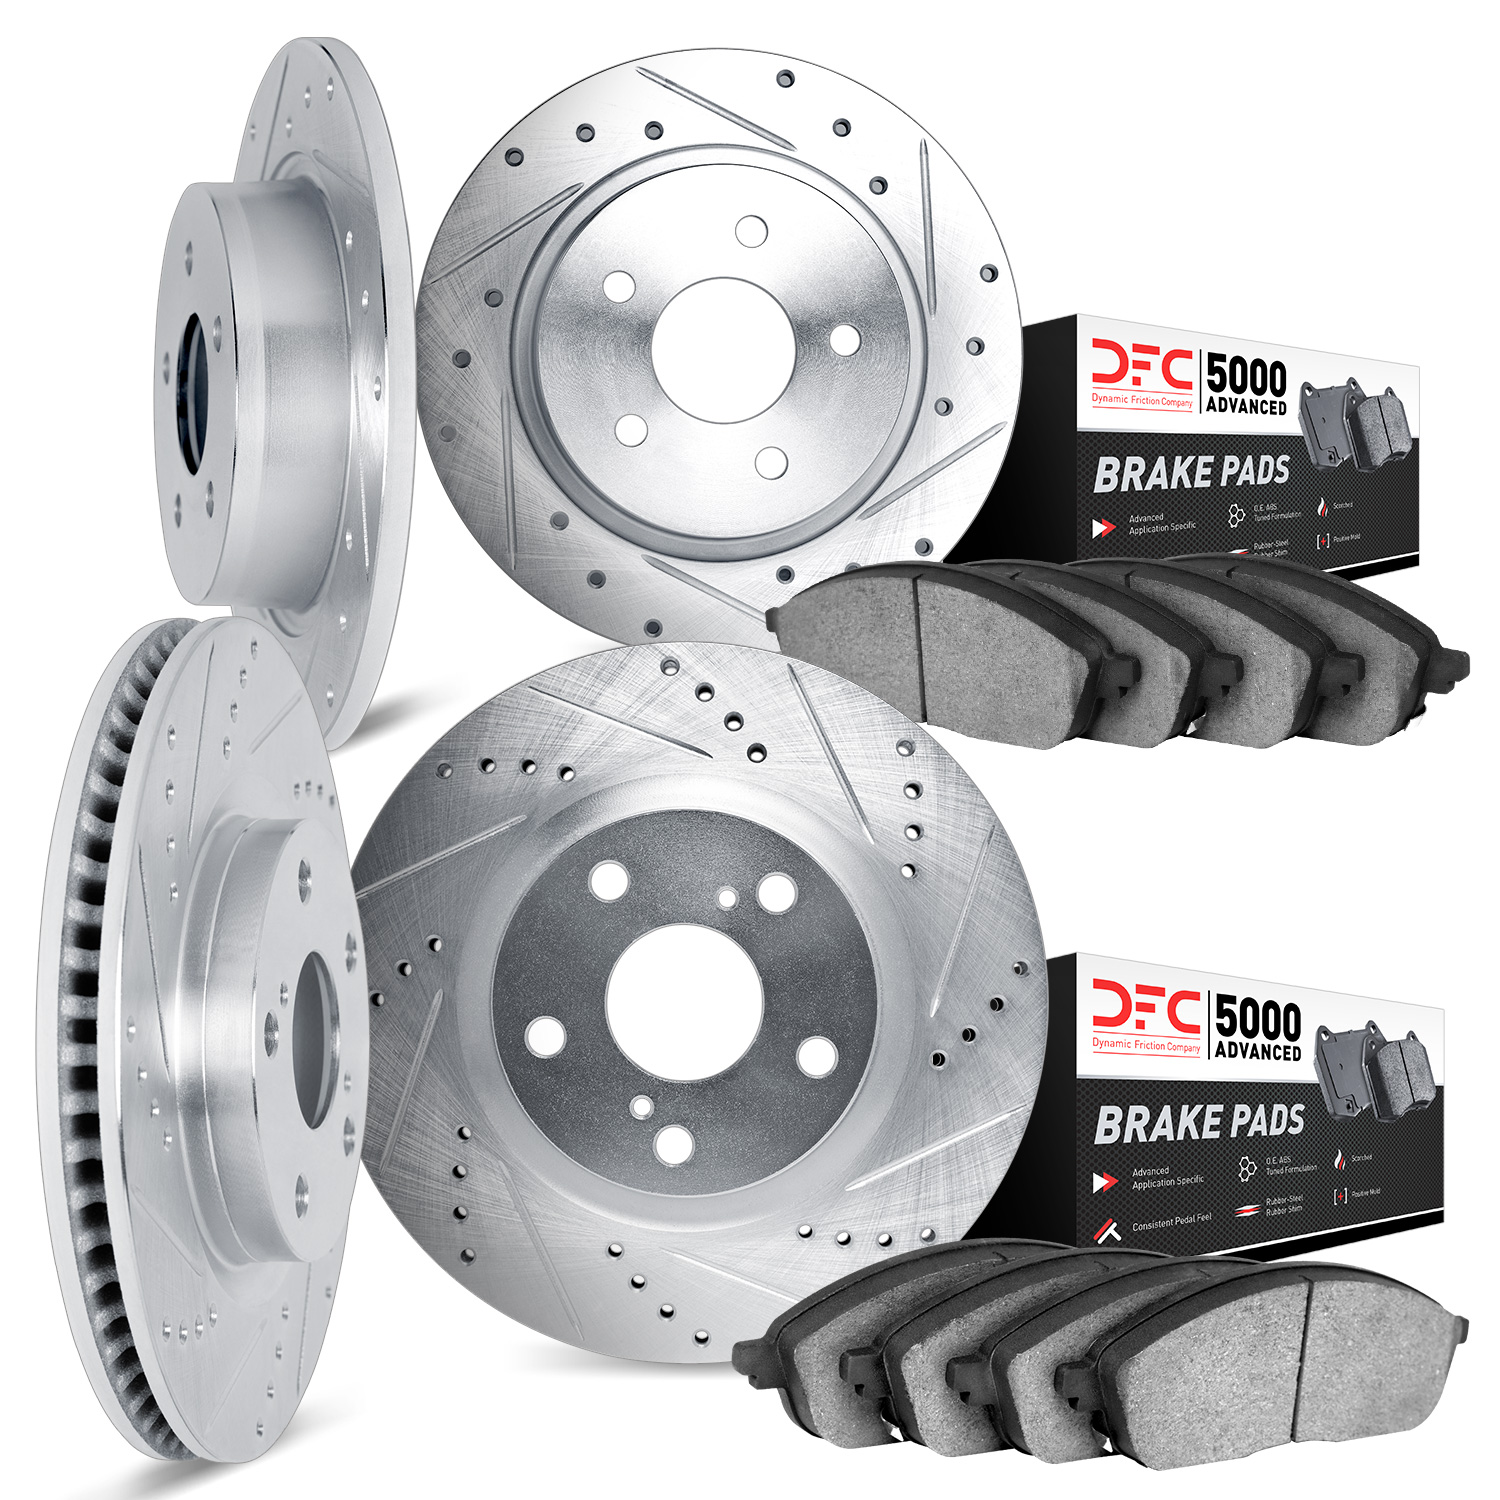 7504-74068 Drilled/Slotted Brake Rotors w/5000 Advanced Brake Pads Kit [Silver], 2006-2010 Audi/Volkswagen, Position: Front and